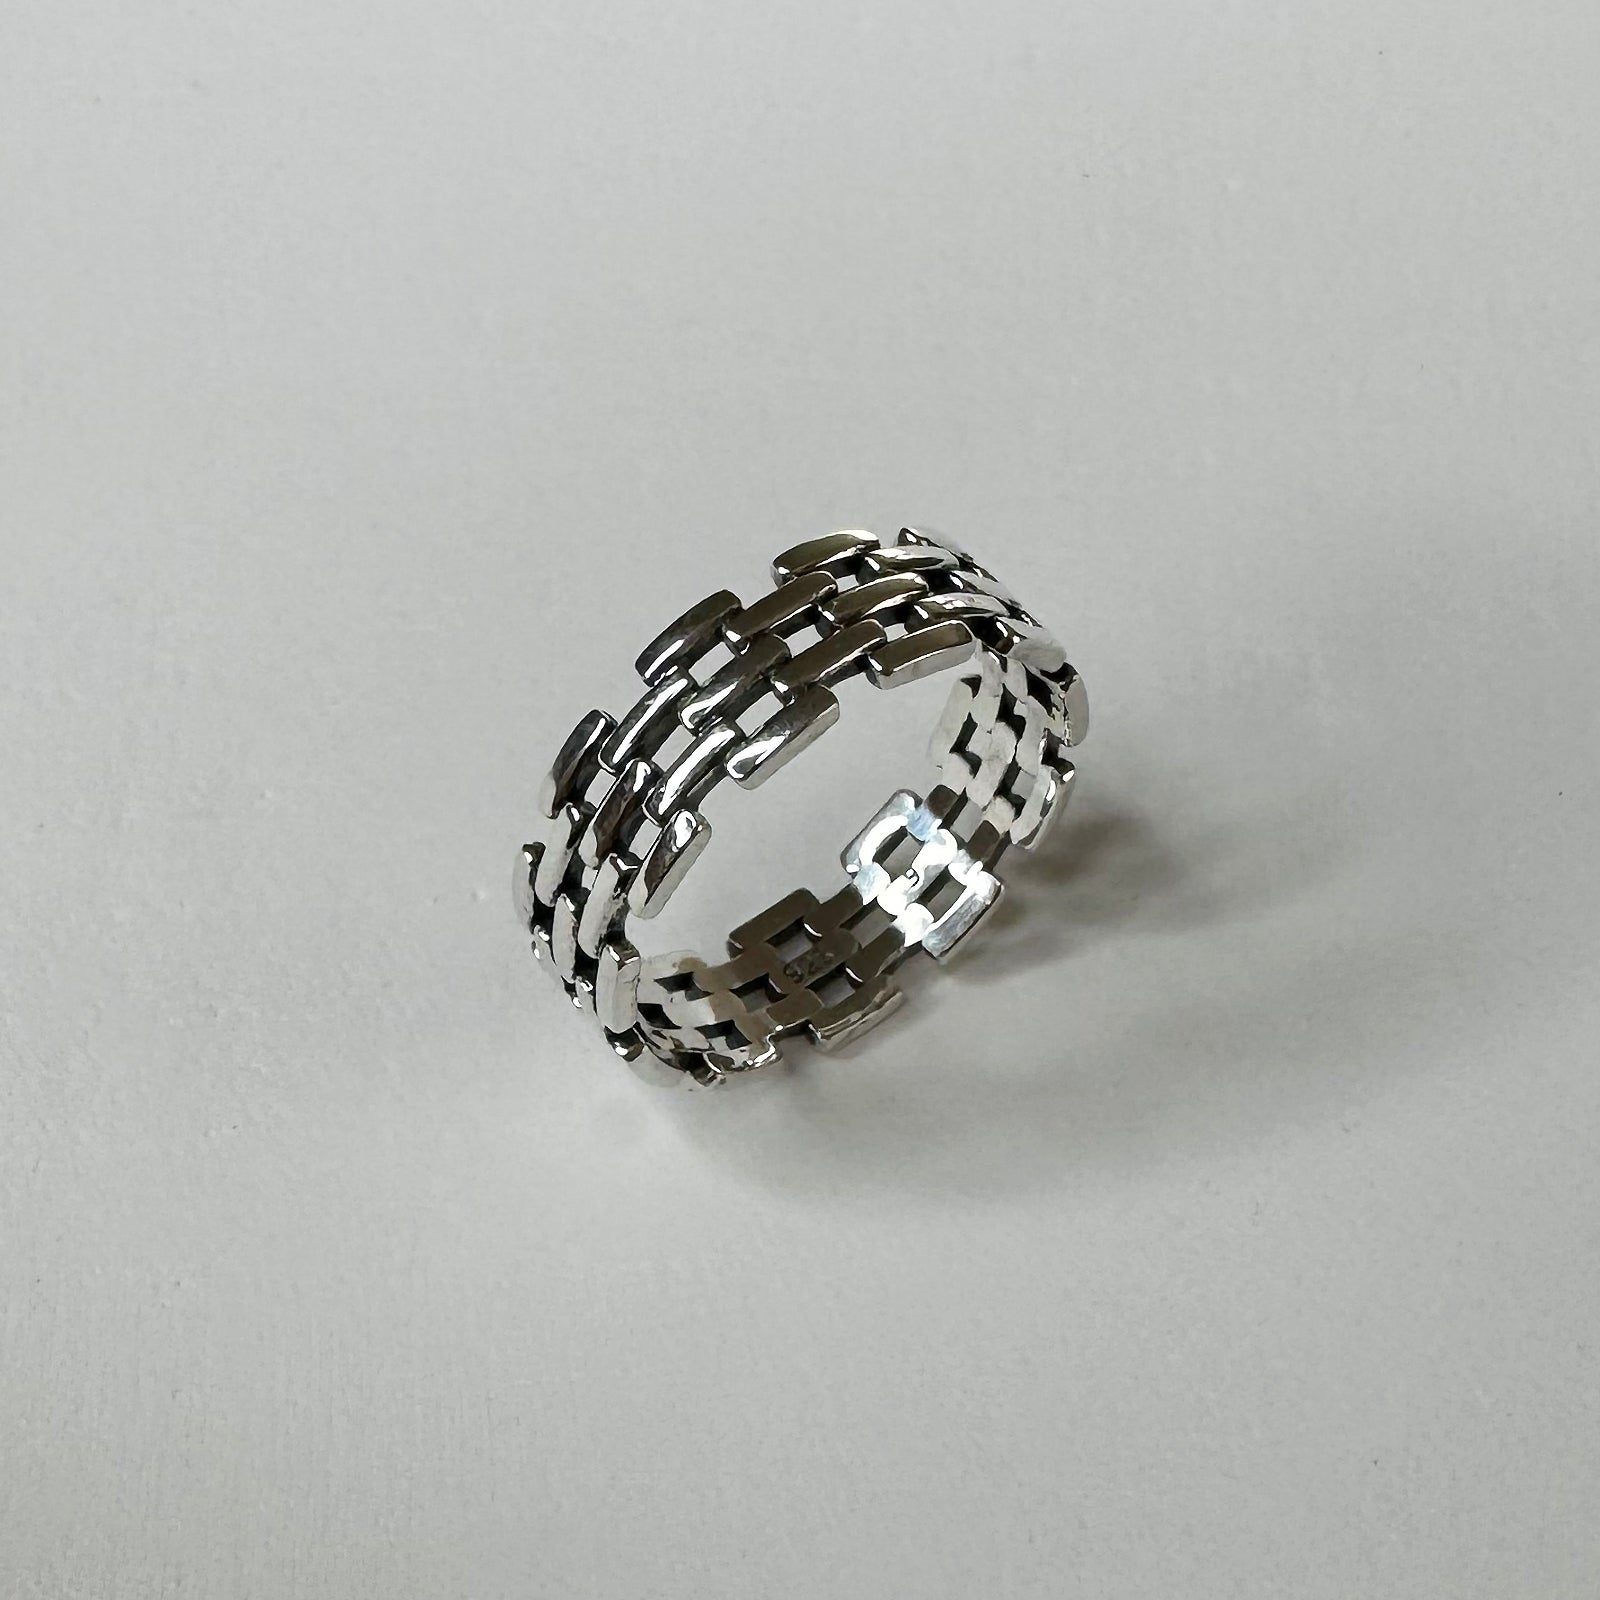 Top Side view of Brick Ring. This is a 925 sterling silver ring